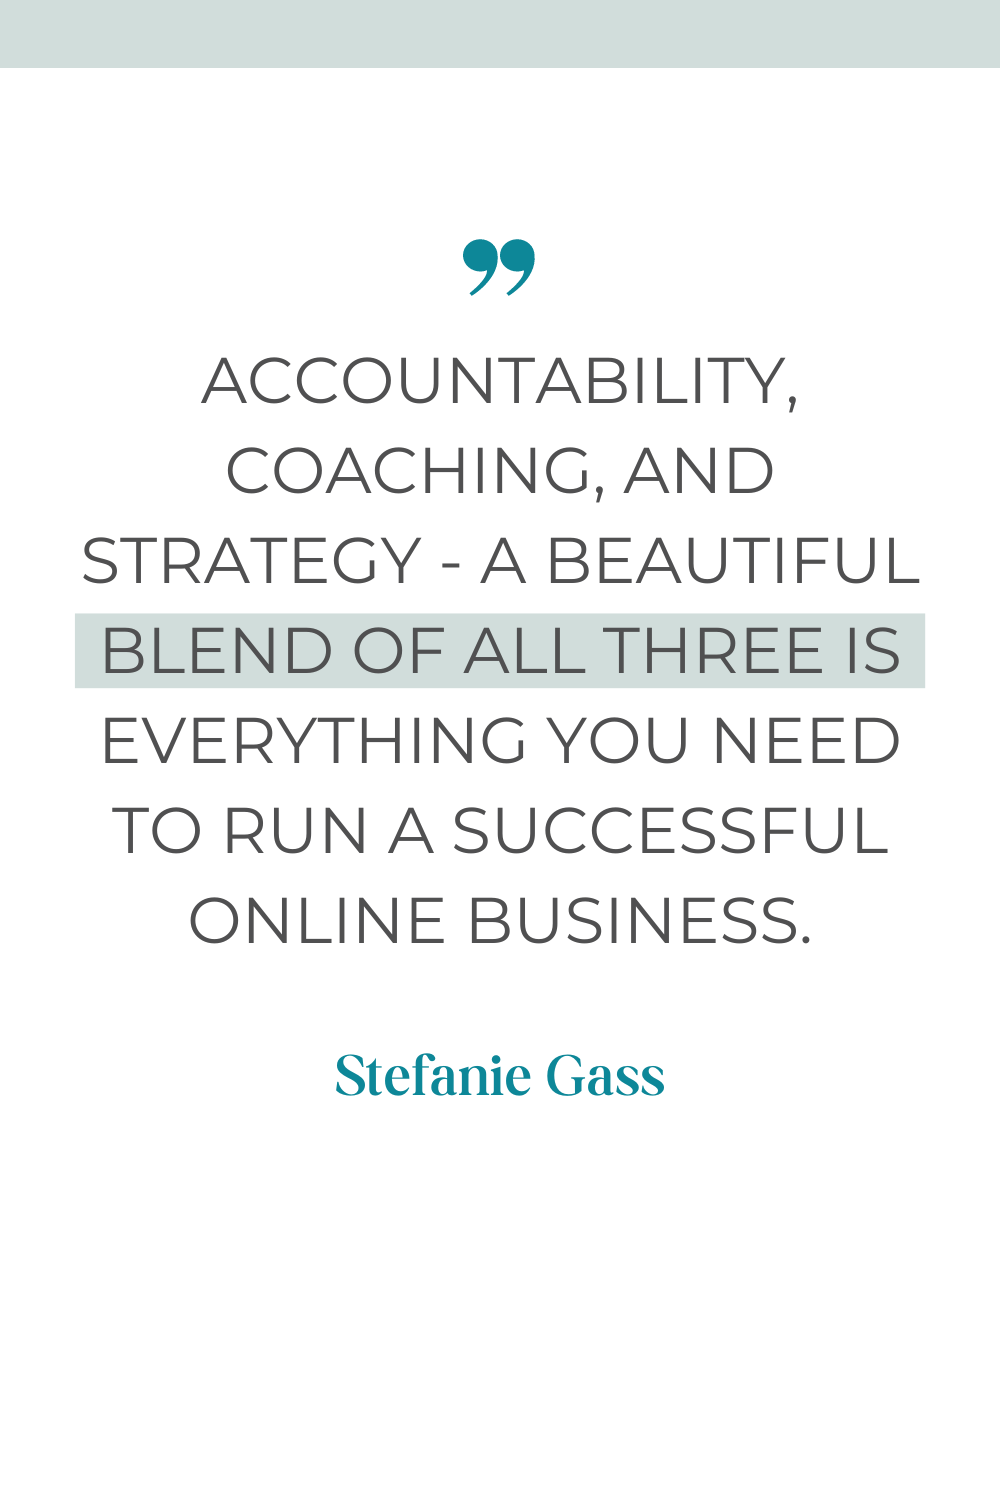 Stefanie Gass quote: accountability, coaching, and strategy - a beautiful blend of all three is everything you need to run a successful online business.